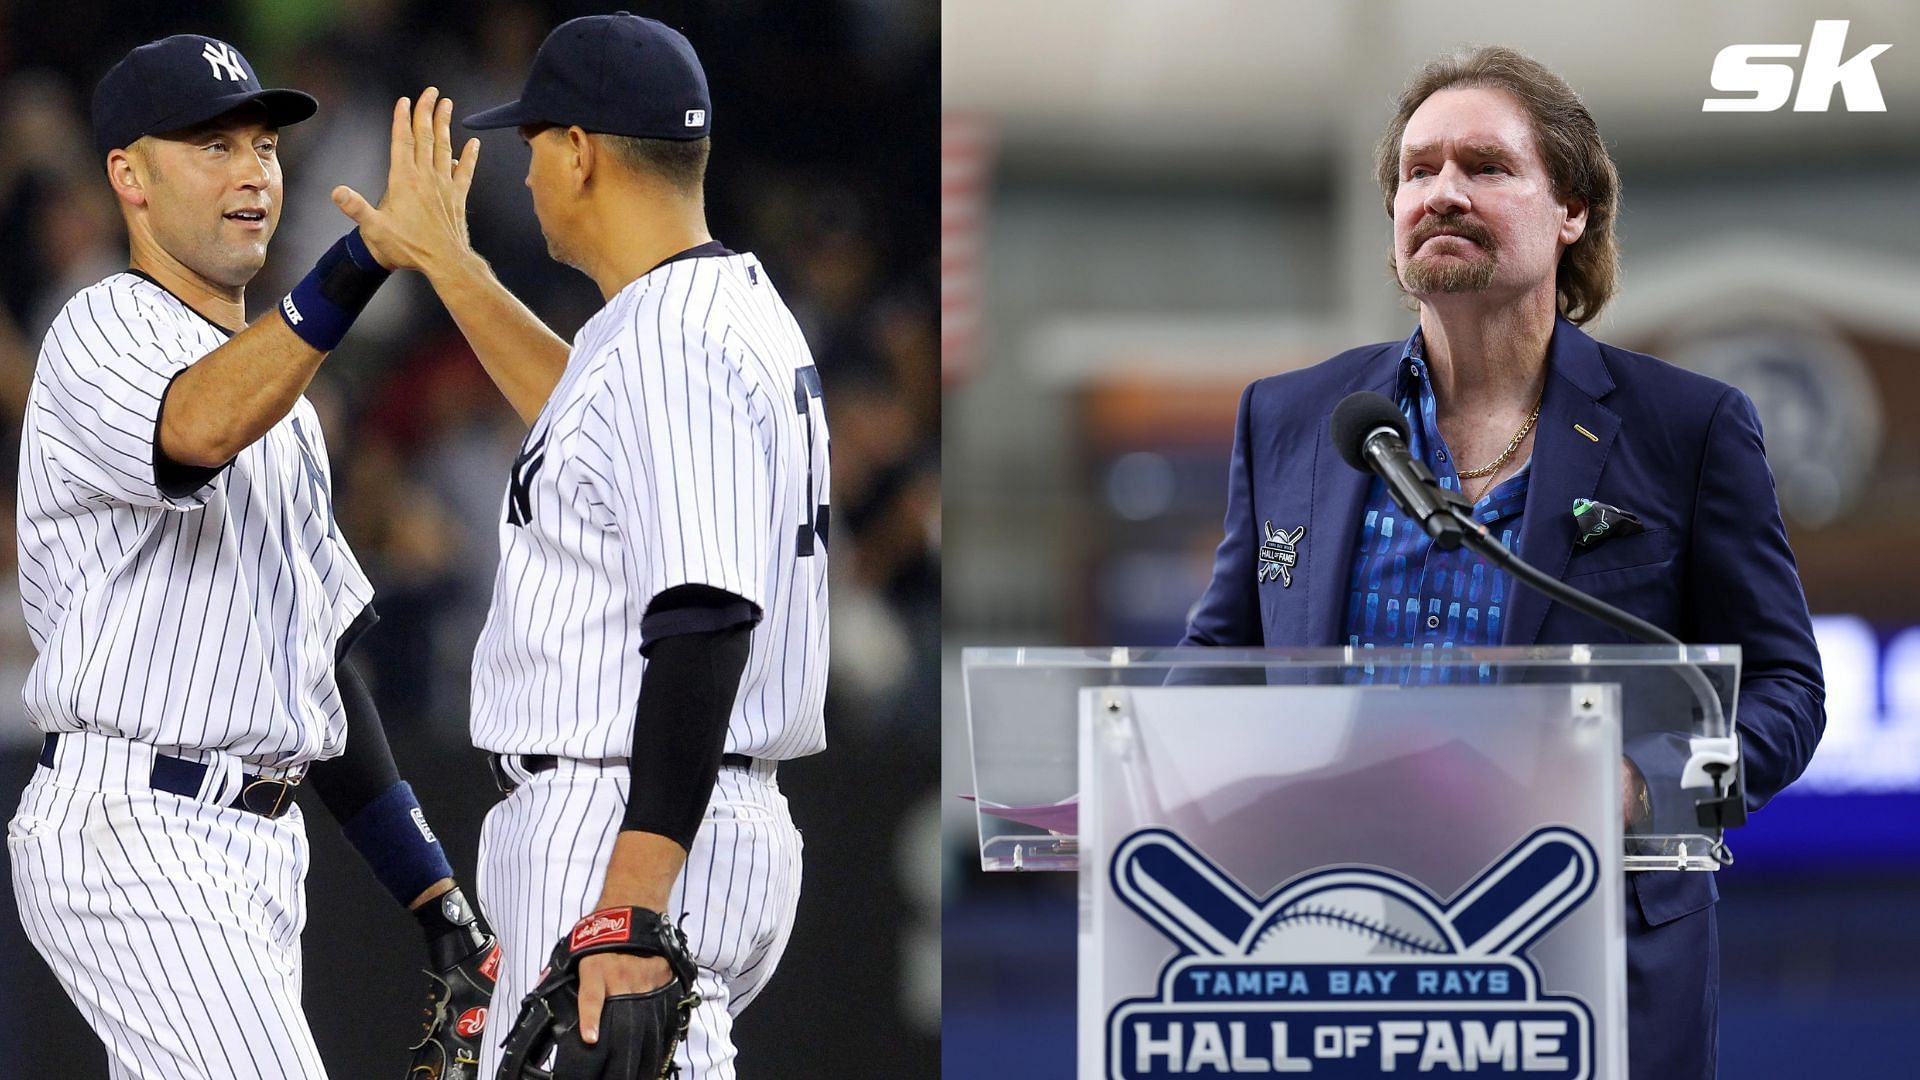 Derek Jeter, Alex Rodriguez, and Wade Boggs all homered on their 3,000th hit